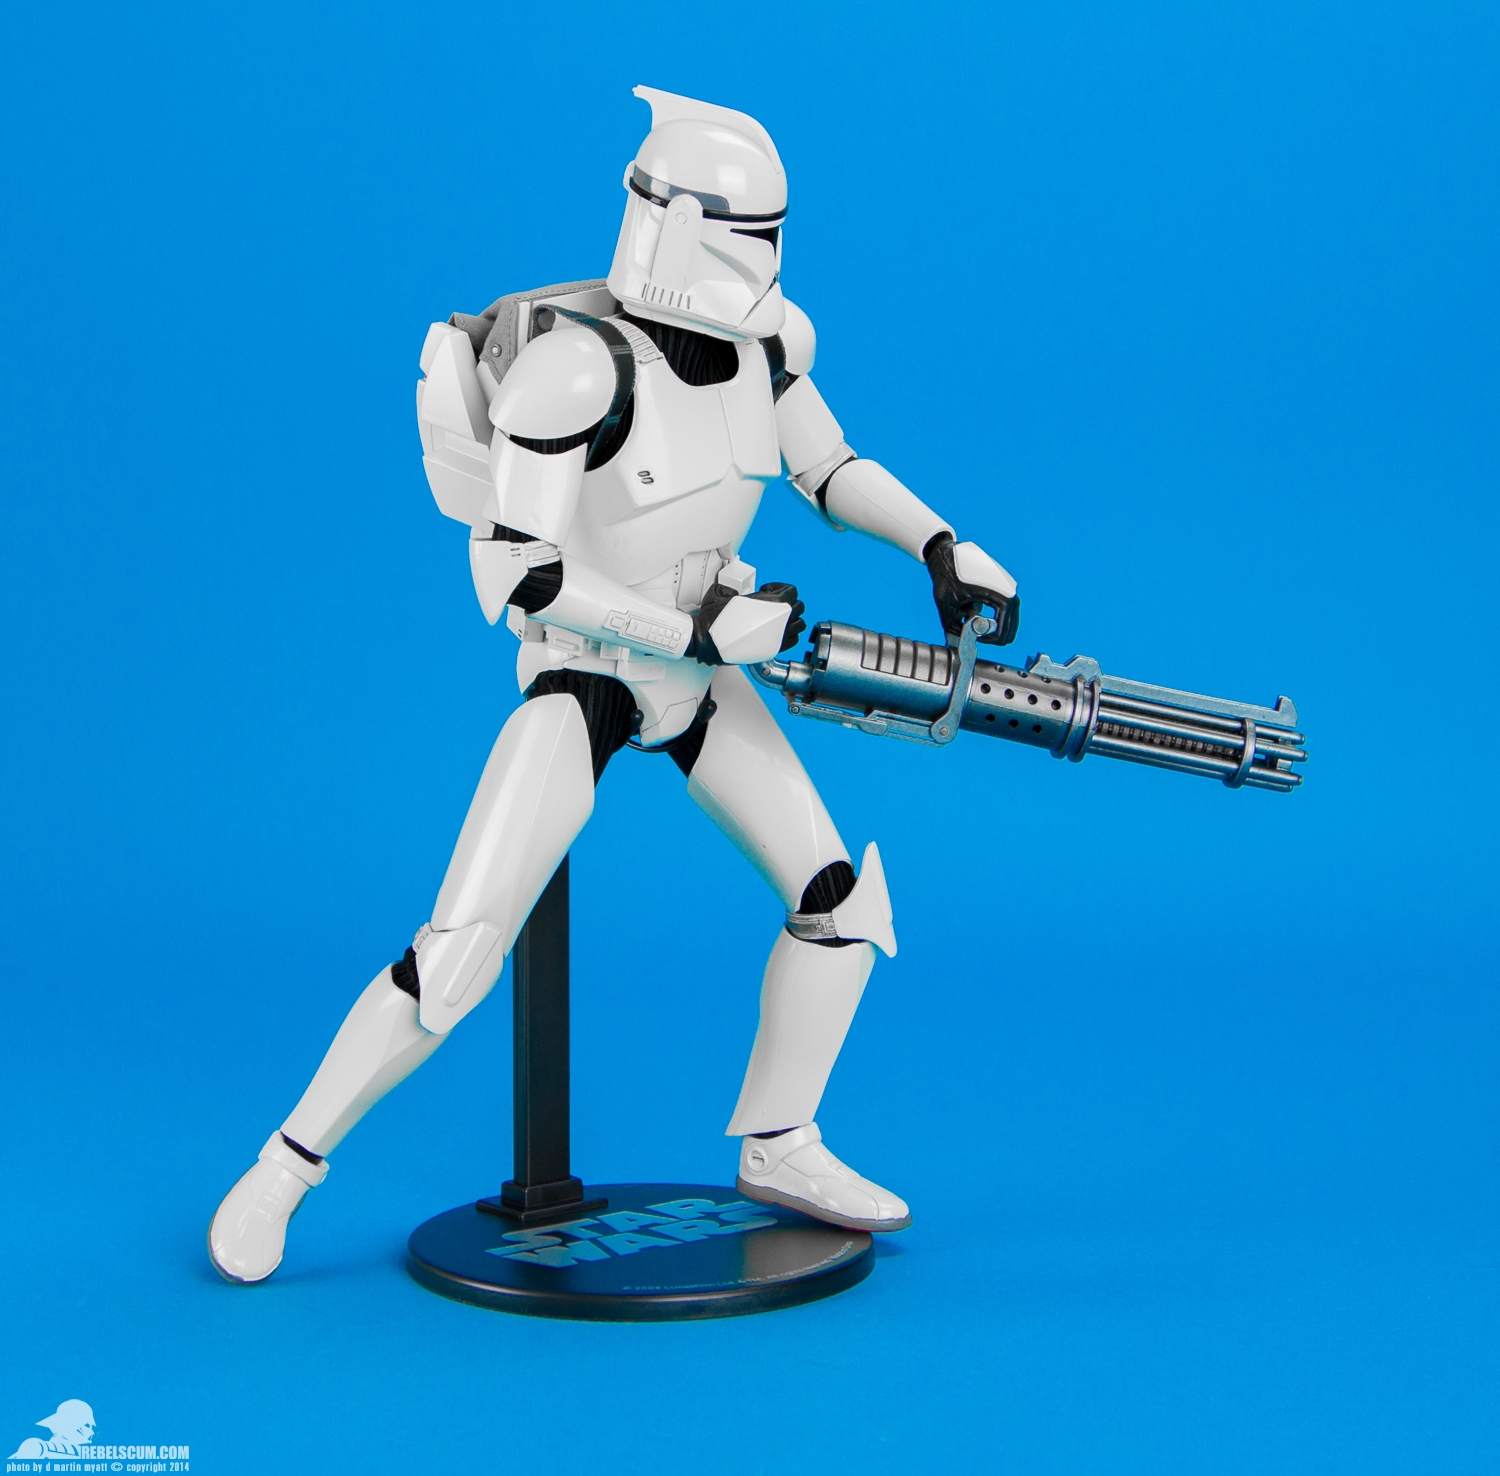 Shiny-Clone-Trooper-Deluxe-Sixth-Scale-Figure-Sideshow-017.jpg